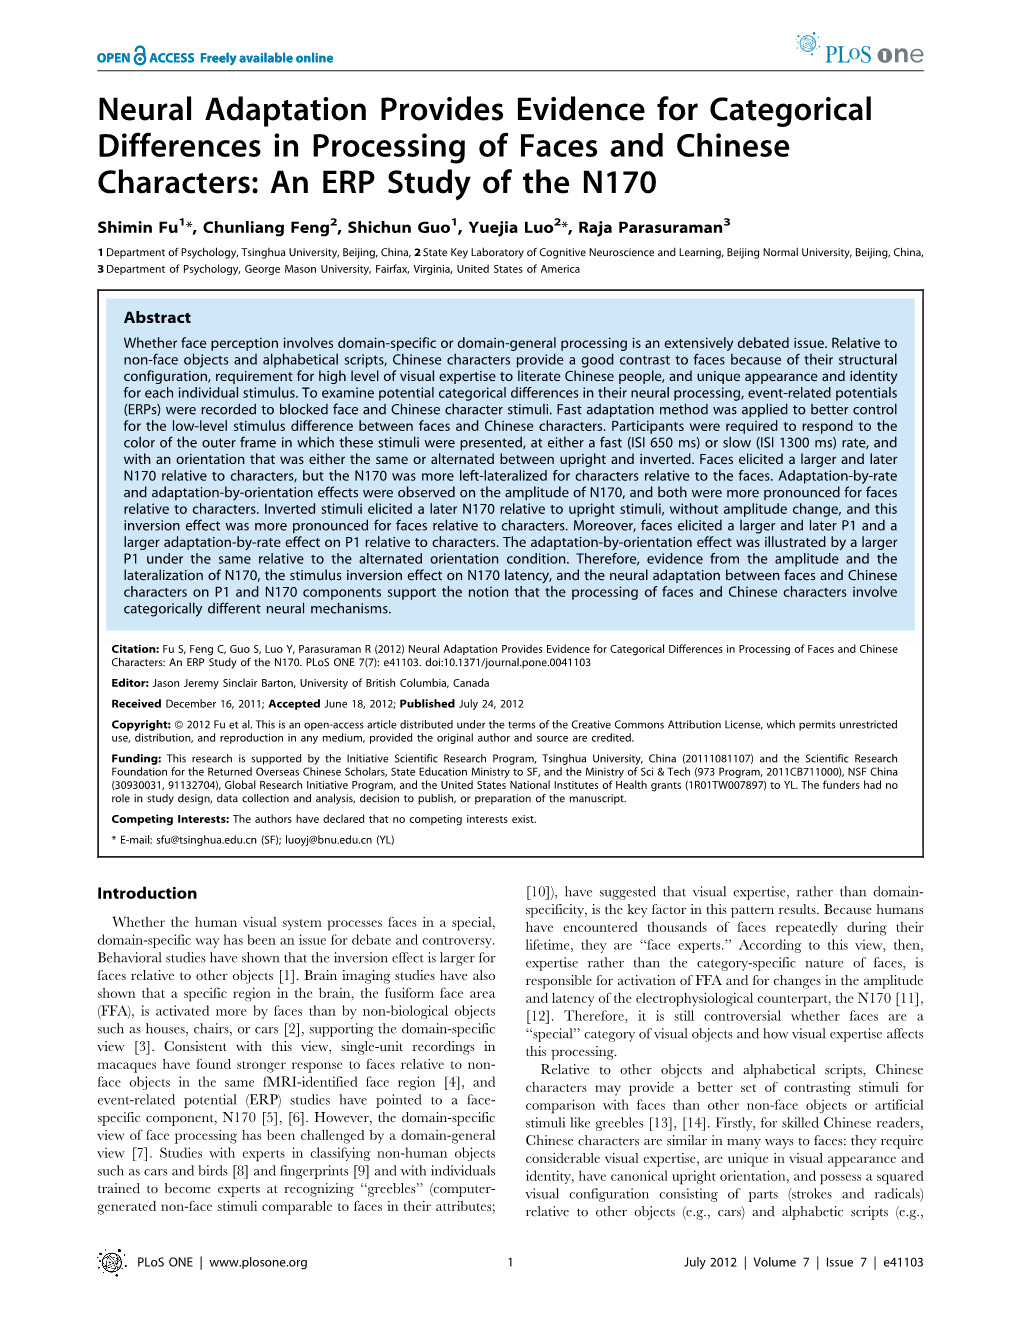 Neural Adaptation Provides Evidence for Categorical Differences in Processing of Faces and Chinese Characters: an ERP Study of the N170